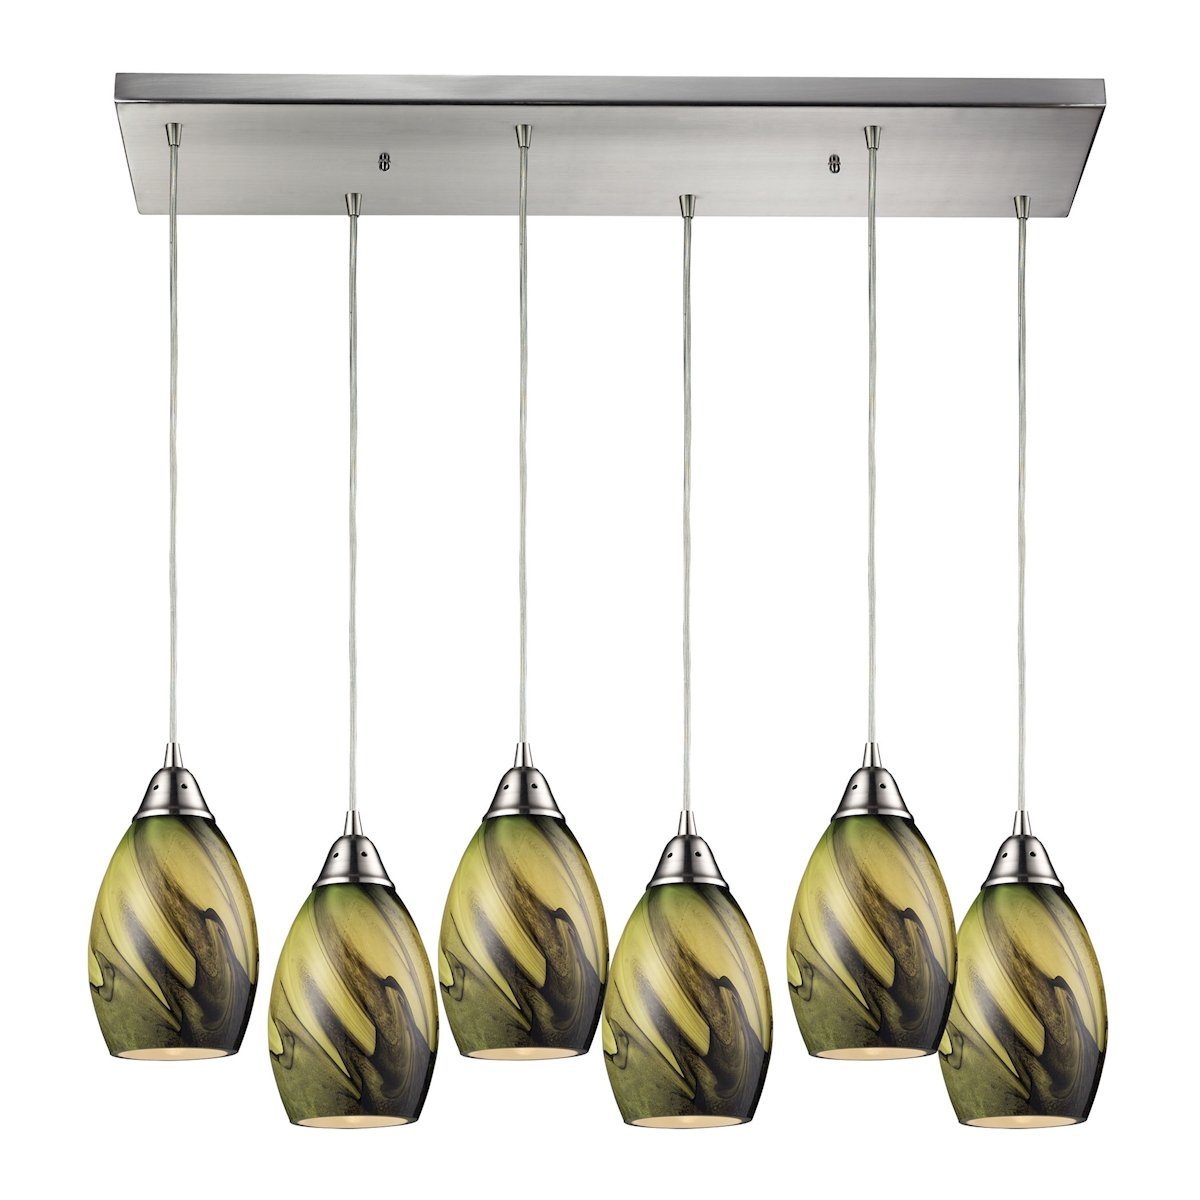 Formations 6 Light Pendant In Satin Nickel And Planetary Glass Ceiling Elk Lighting 